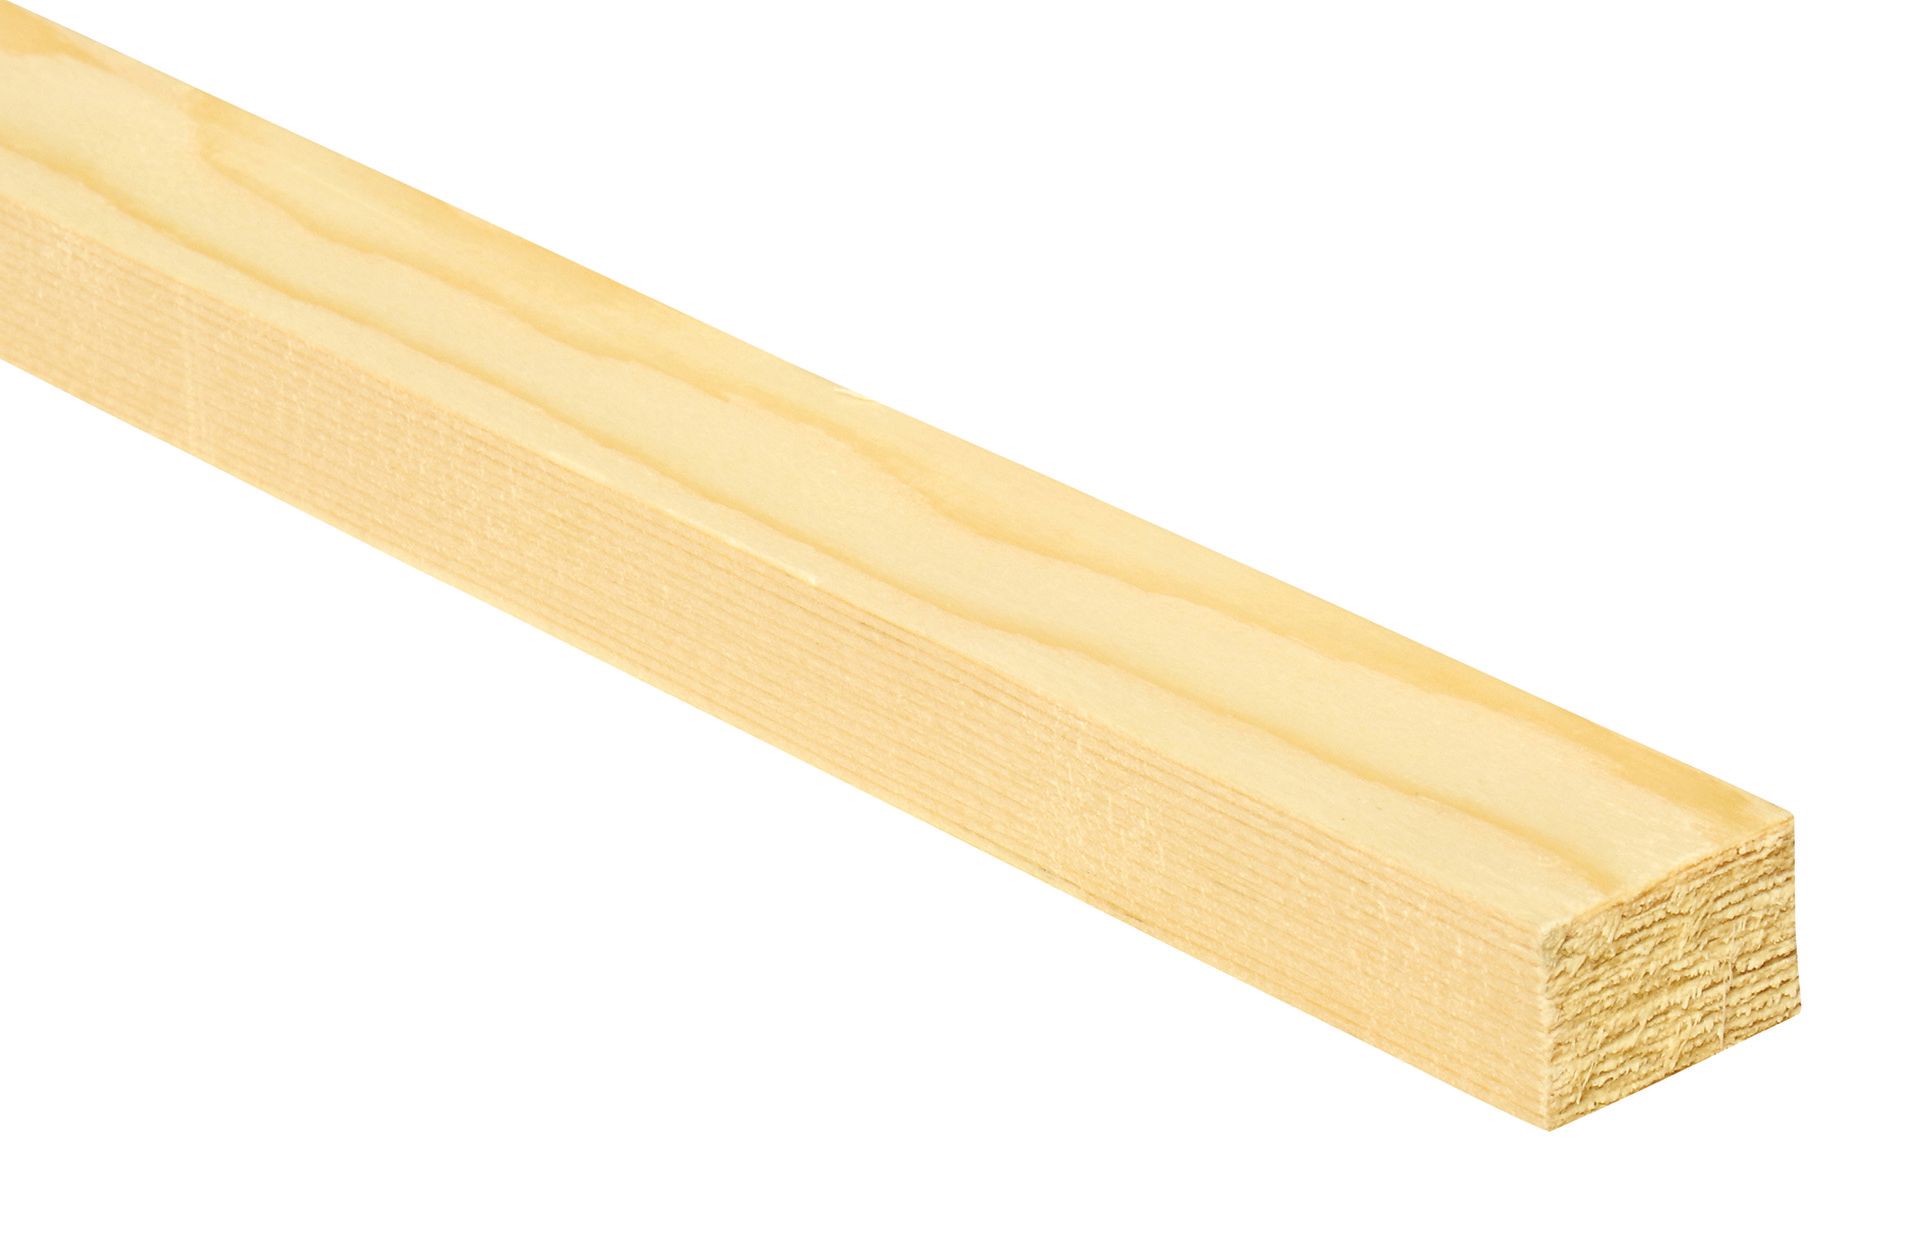 Image of Wickes Whitewood PSE Timber - 18mm x 28mm x 2400mm